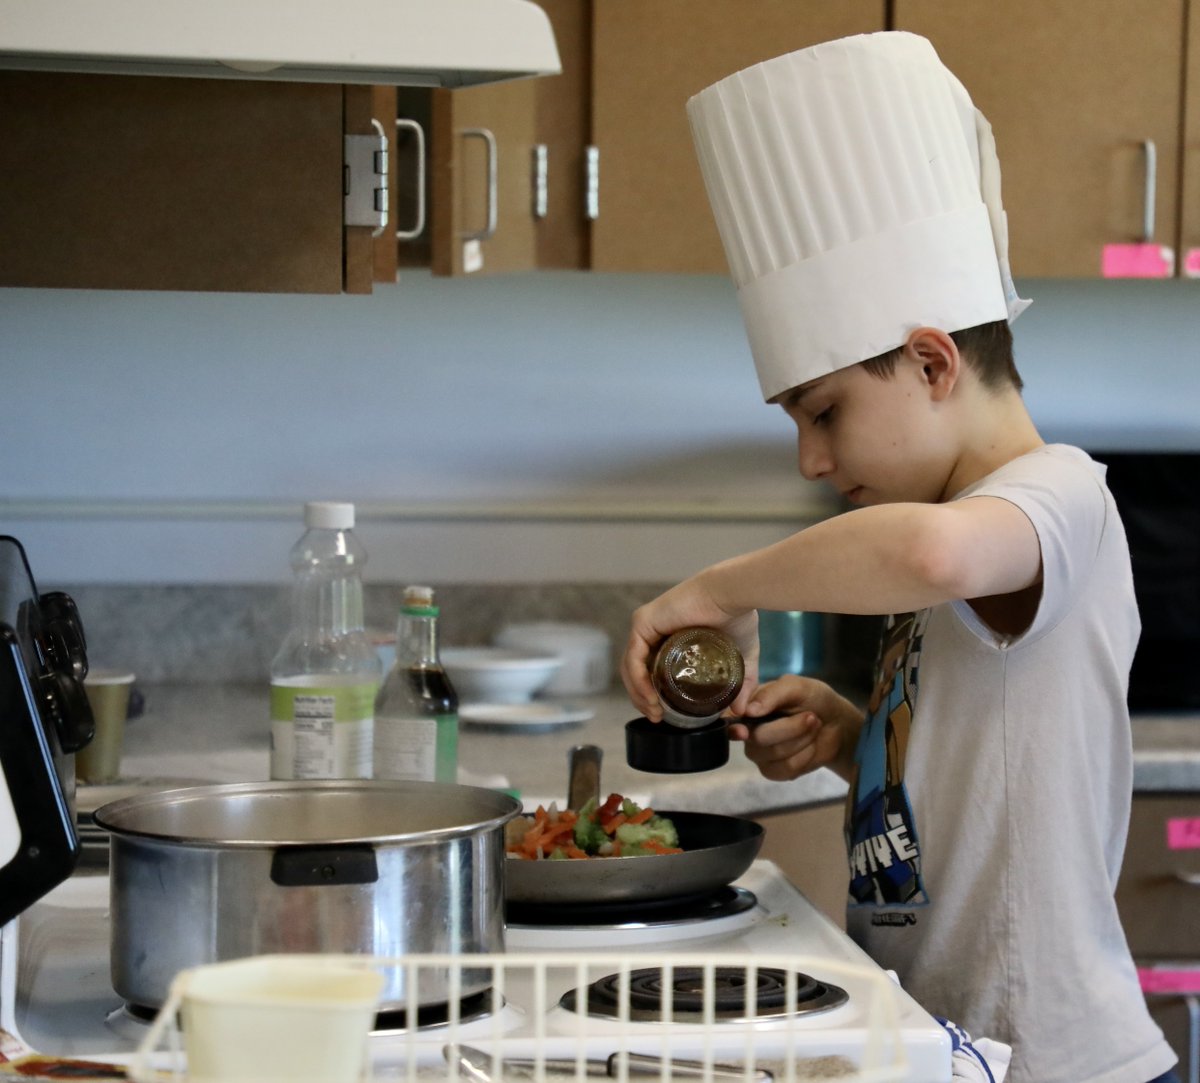 🧑‍🍳👩‍🍳Today was Iron Chef day at the Middle School & the kitchen was B U S Y !! We also had a visit from @13WHAM so be sure to tune in to tonight's newscast to see how our students did in the art of culinary preparation & presentation! #GanandaProud